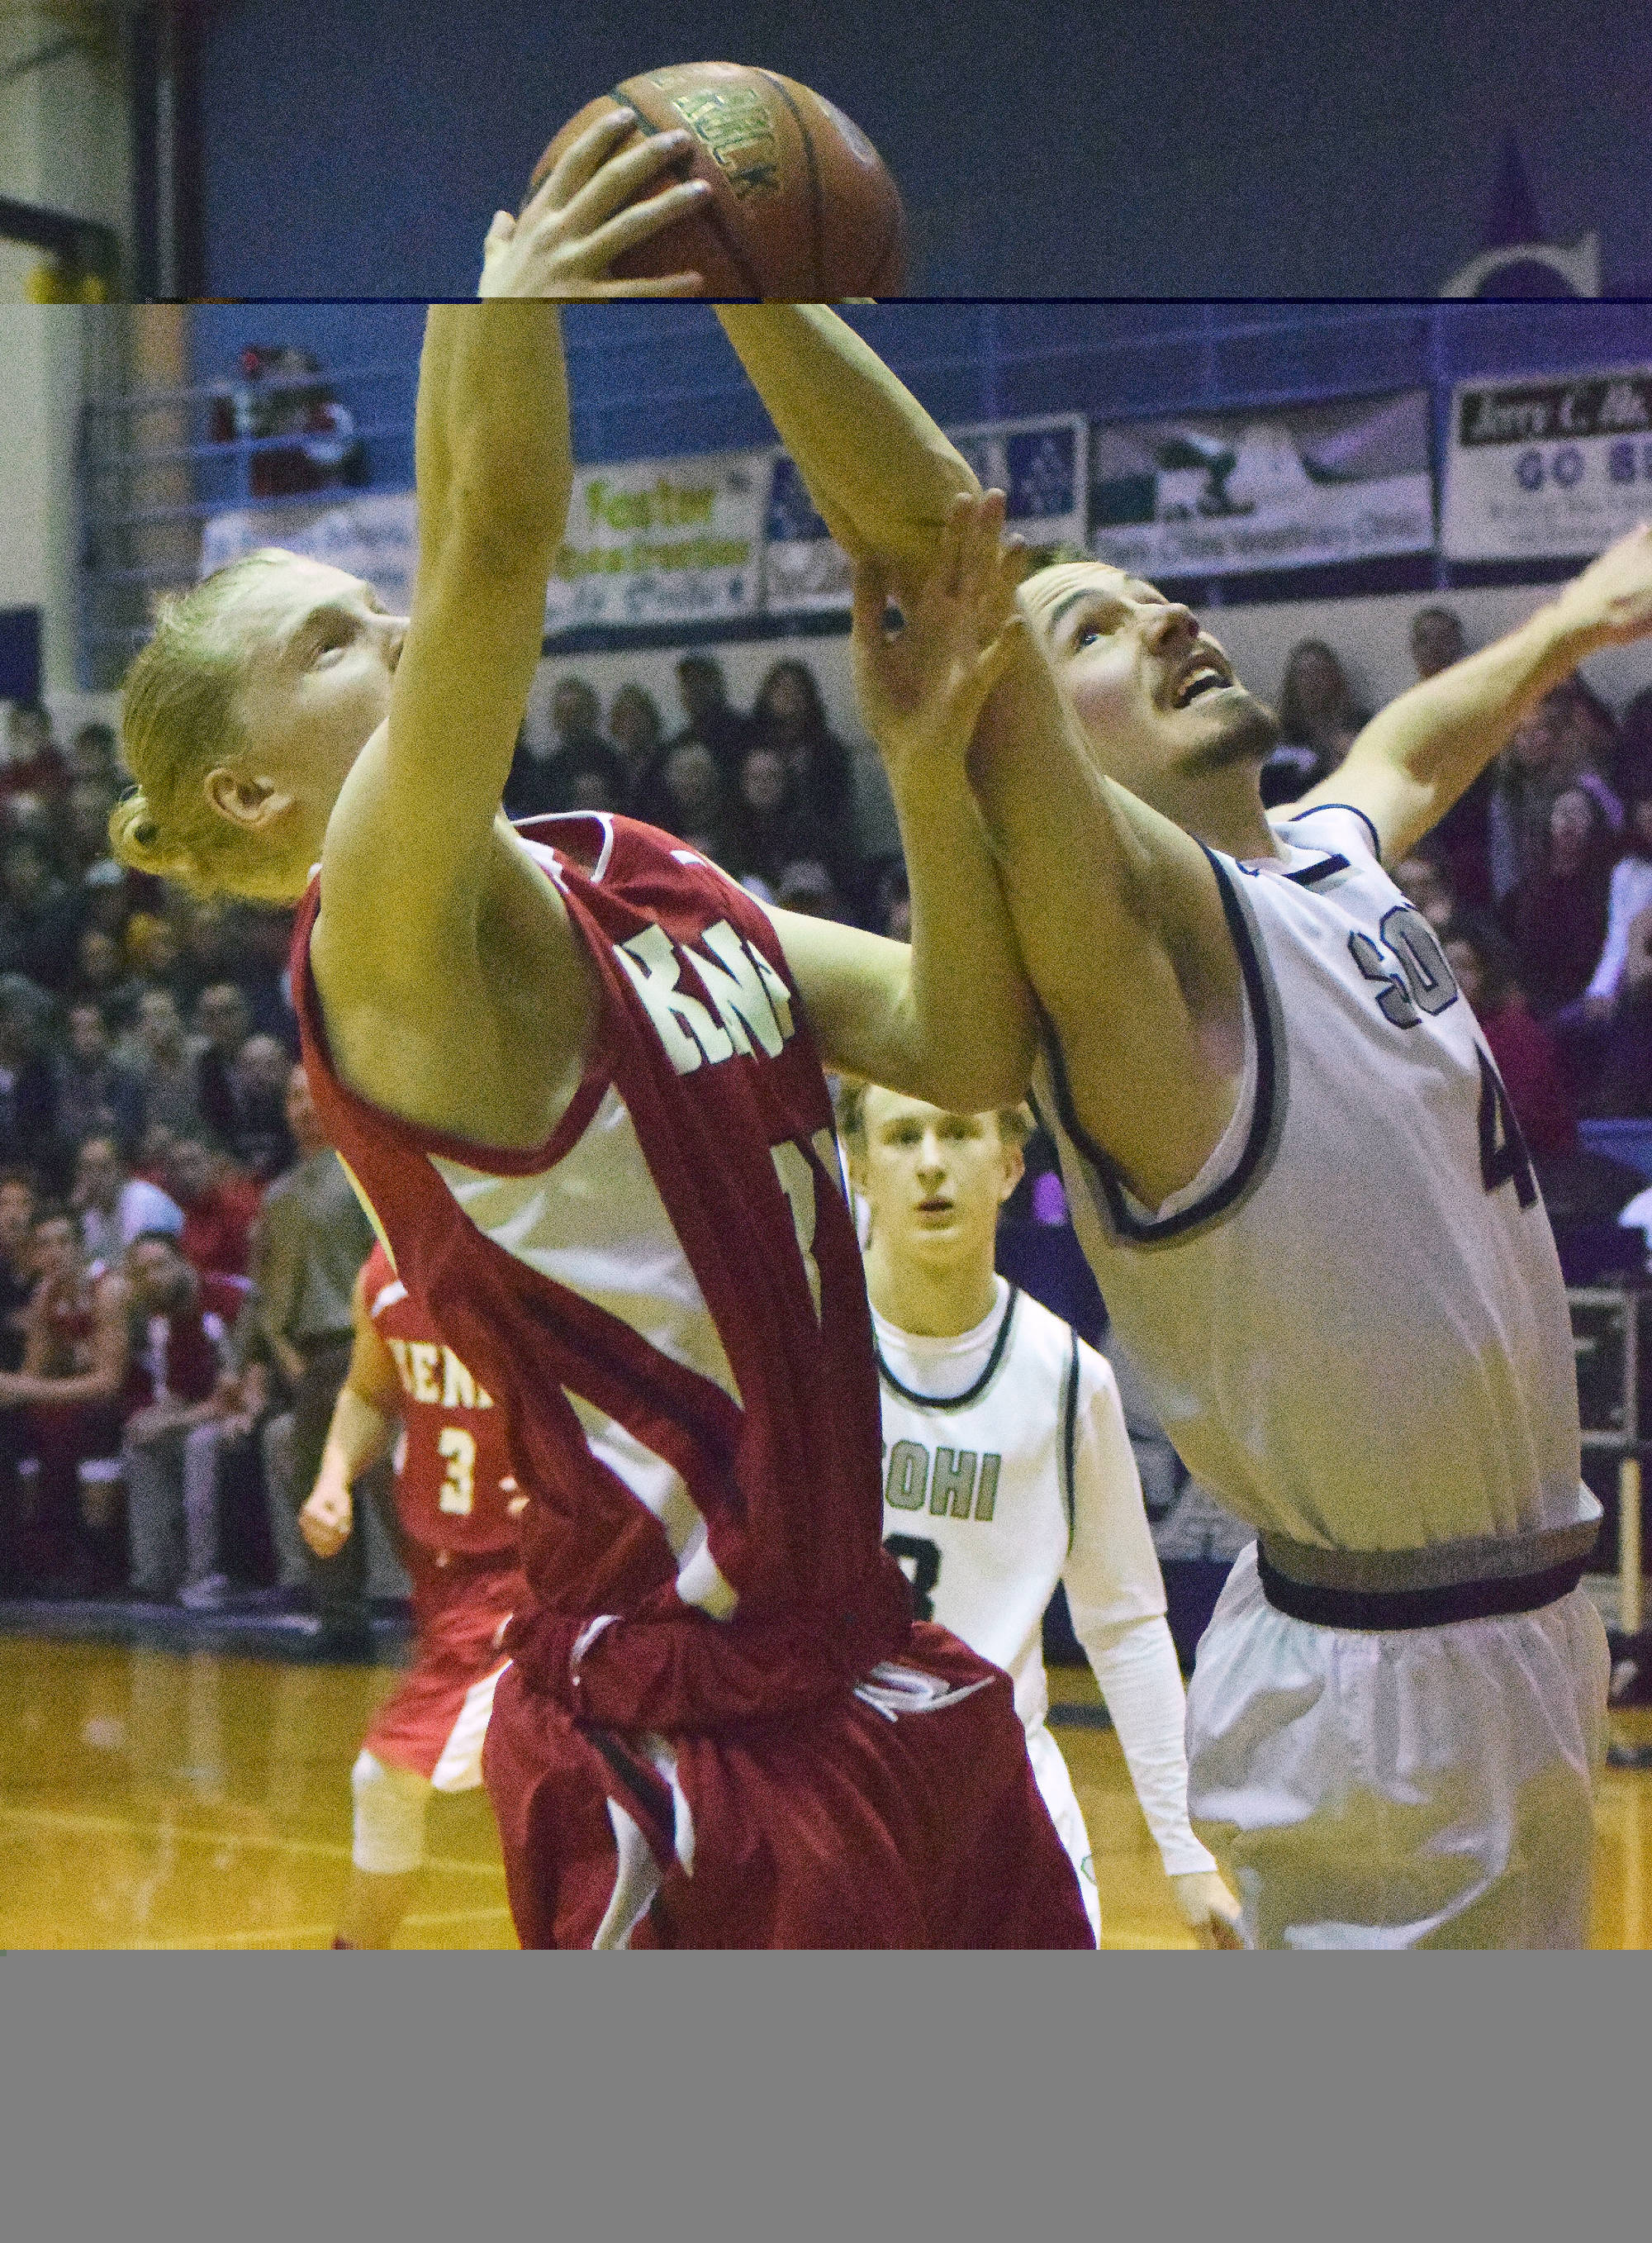 Preben Strende of Kenai Central (left) and Caleb Spence of Soldotna contest a rebound Saturday night at Soldotna High School. (Photo by Joey Klecka/Peninsula Clarion)